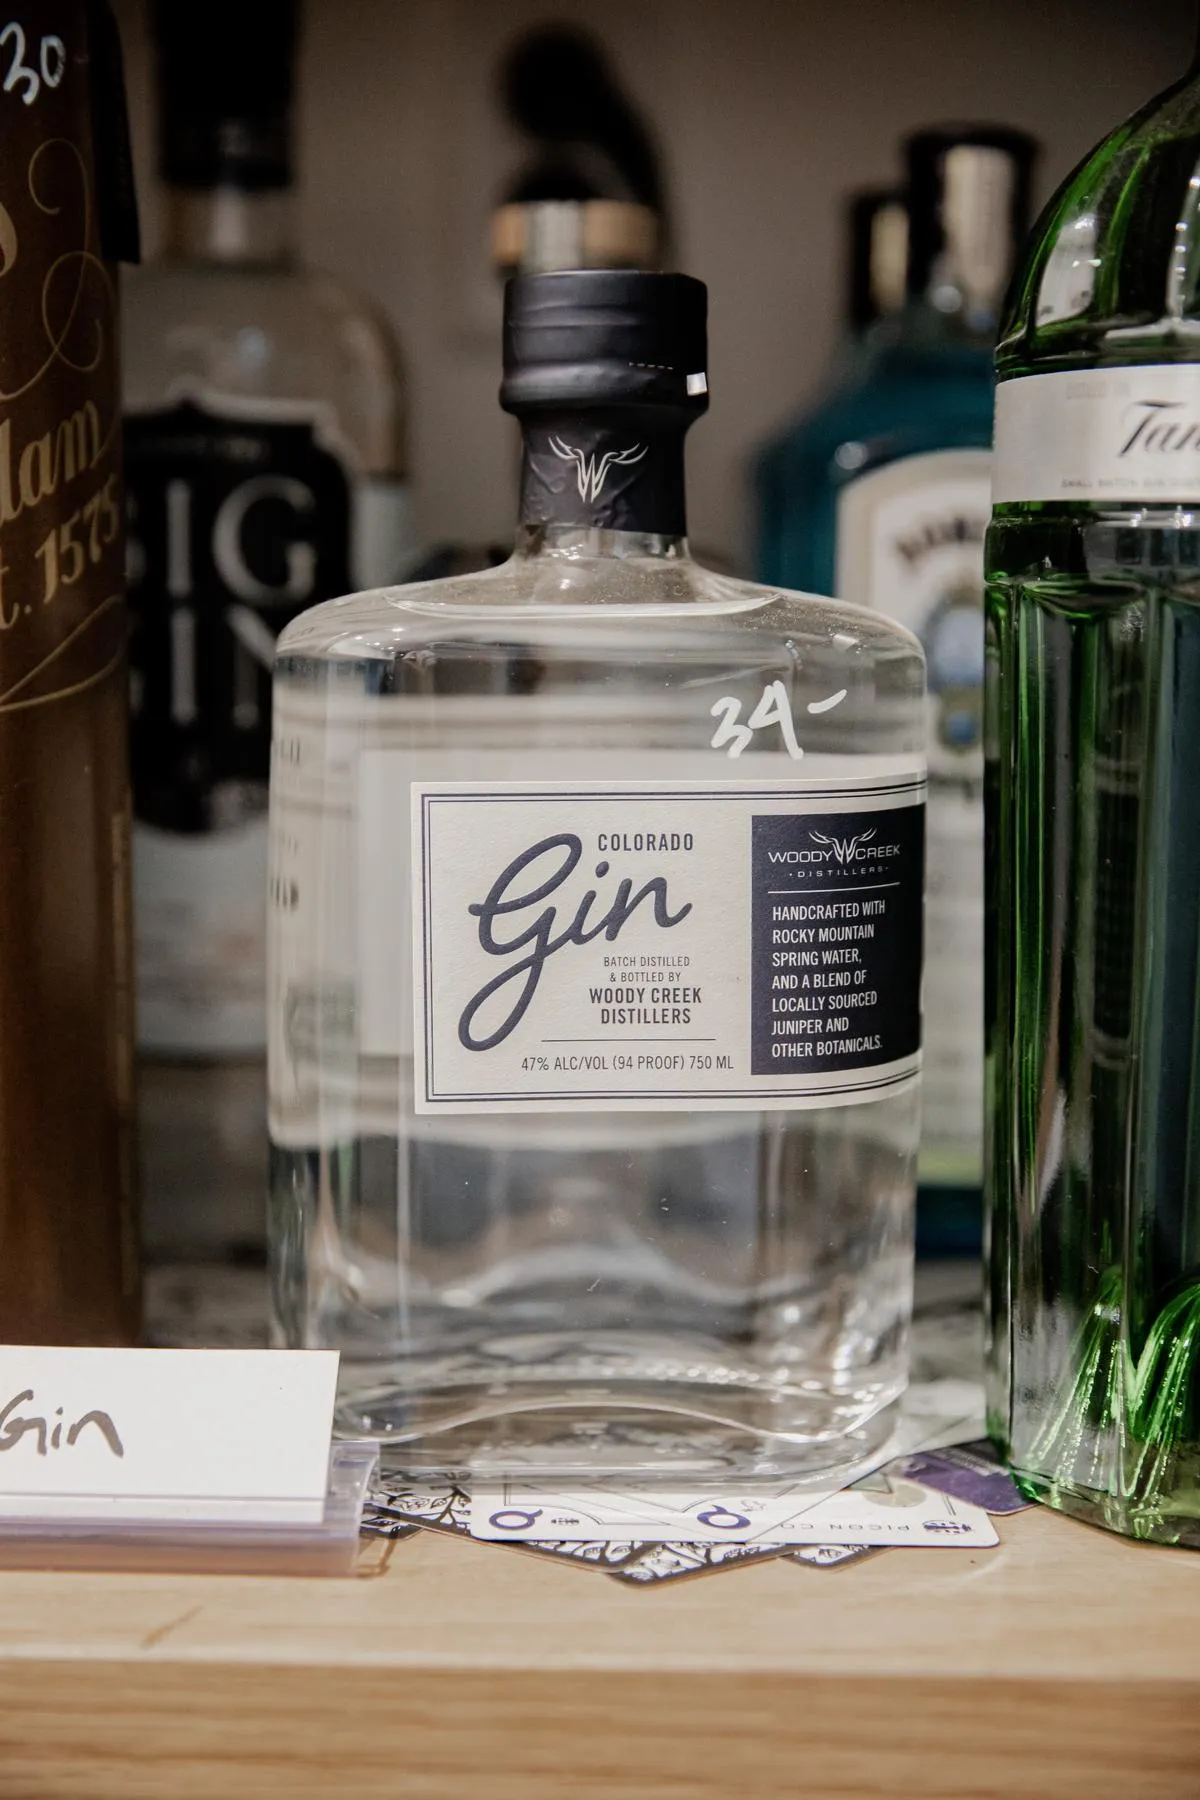 Image of different botanical ingredients used in gin distillation